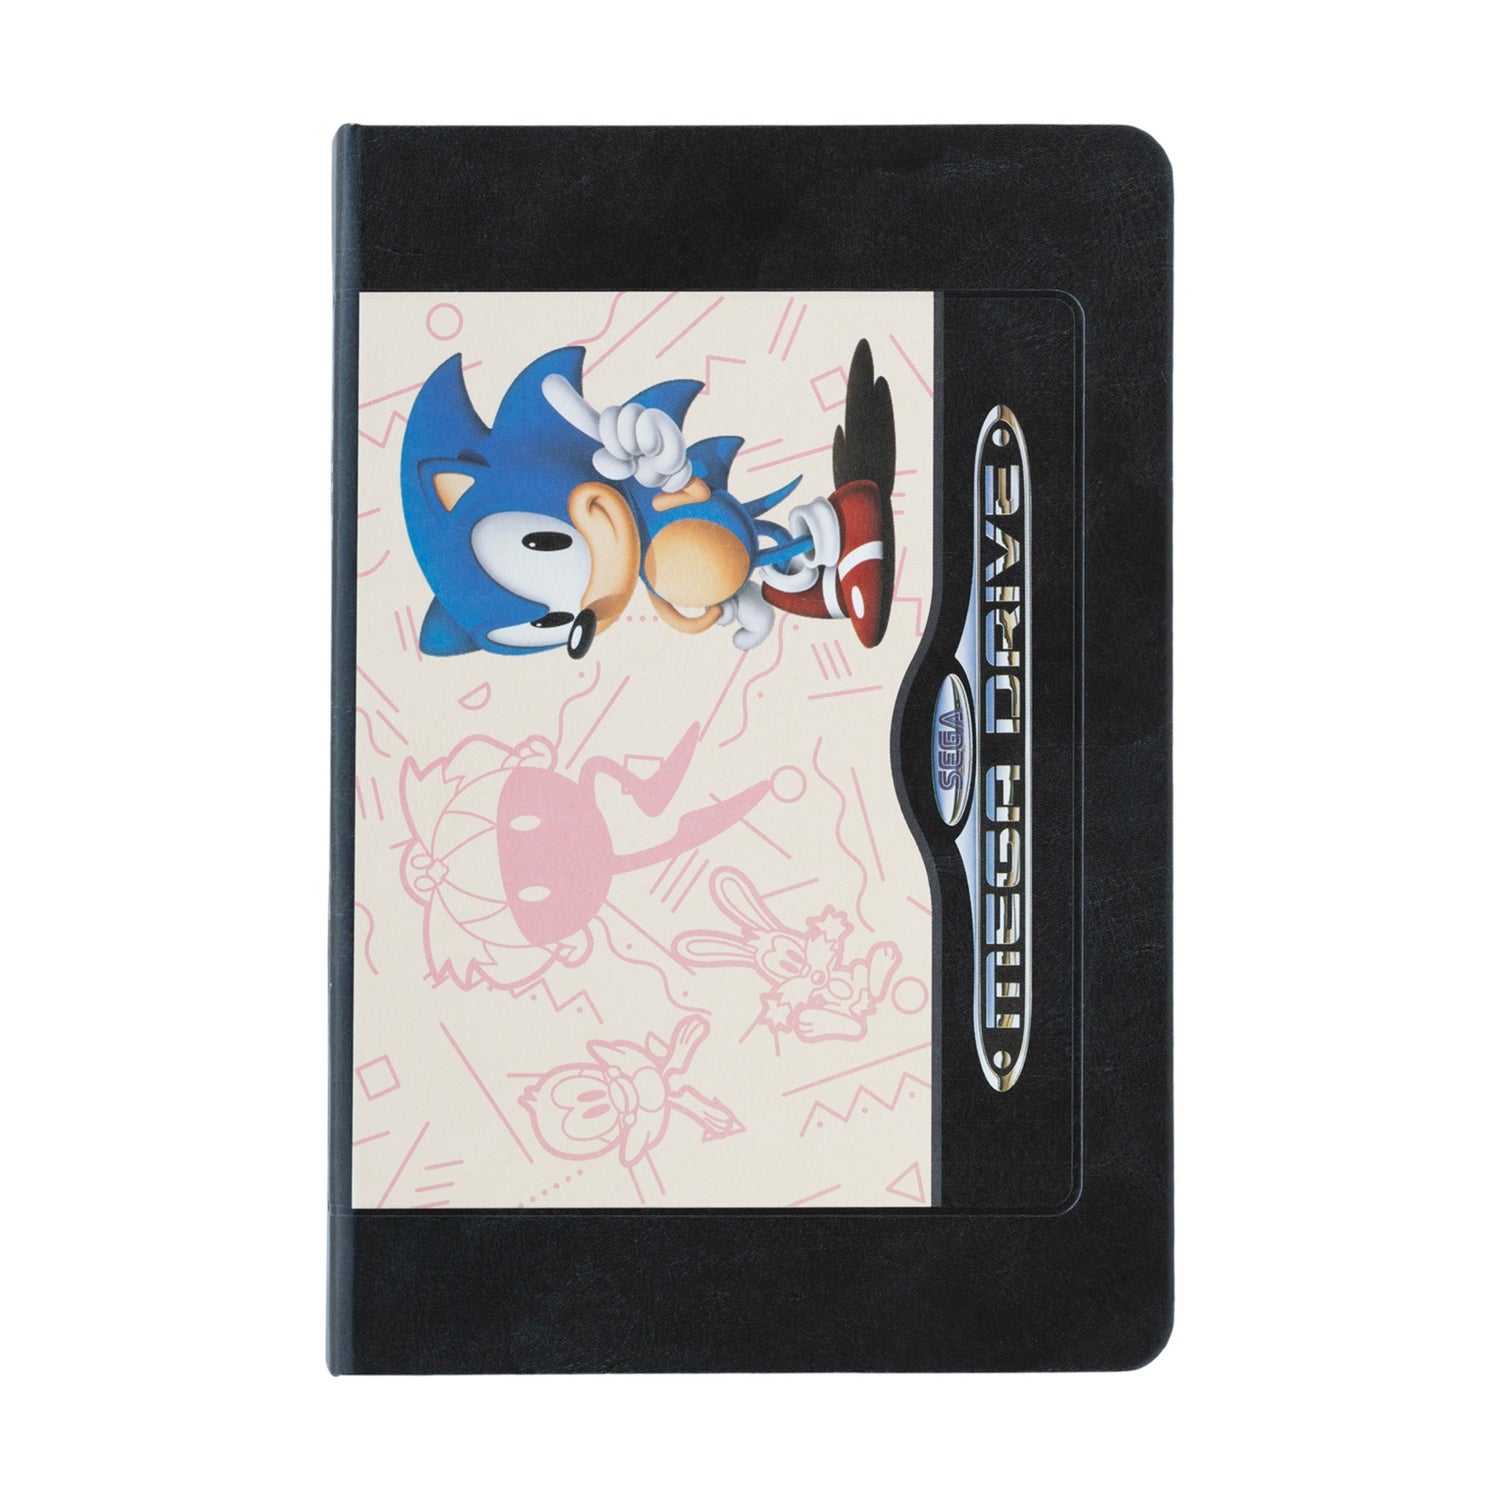 Sonic Premium A5 Notebook With Game Cartridge Gift Box